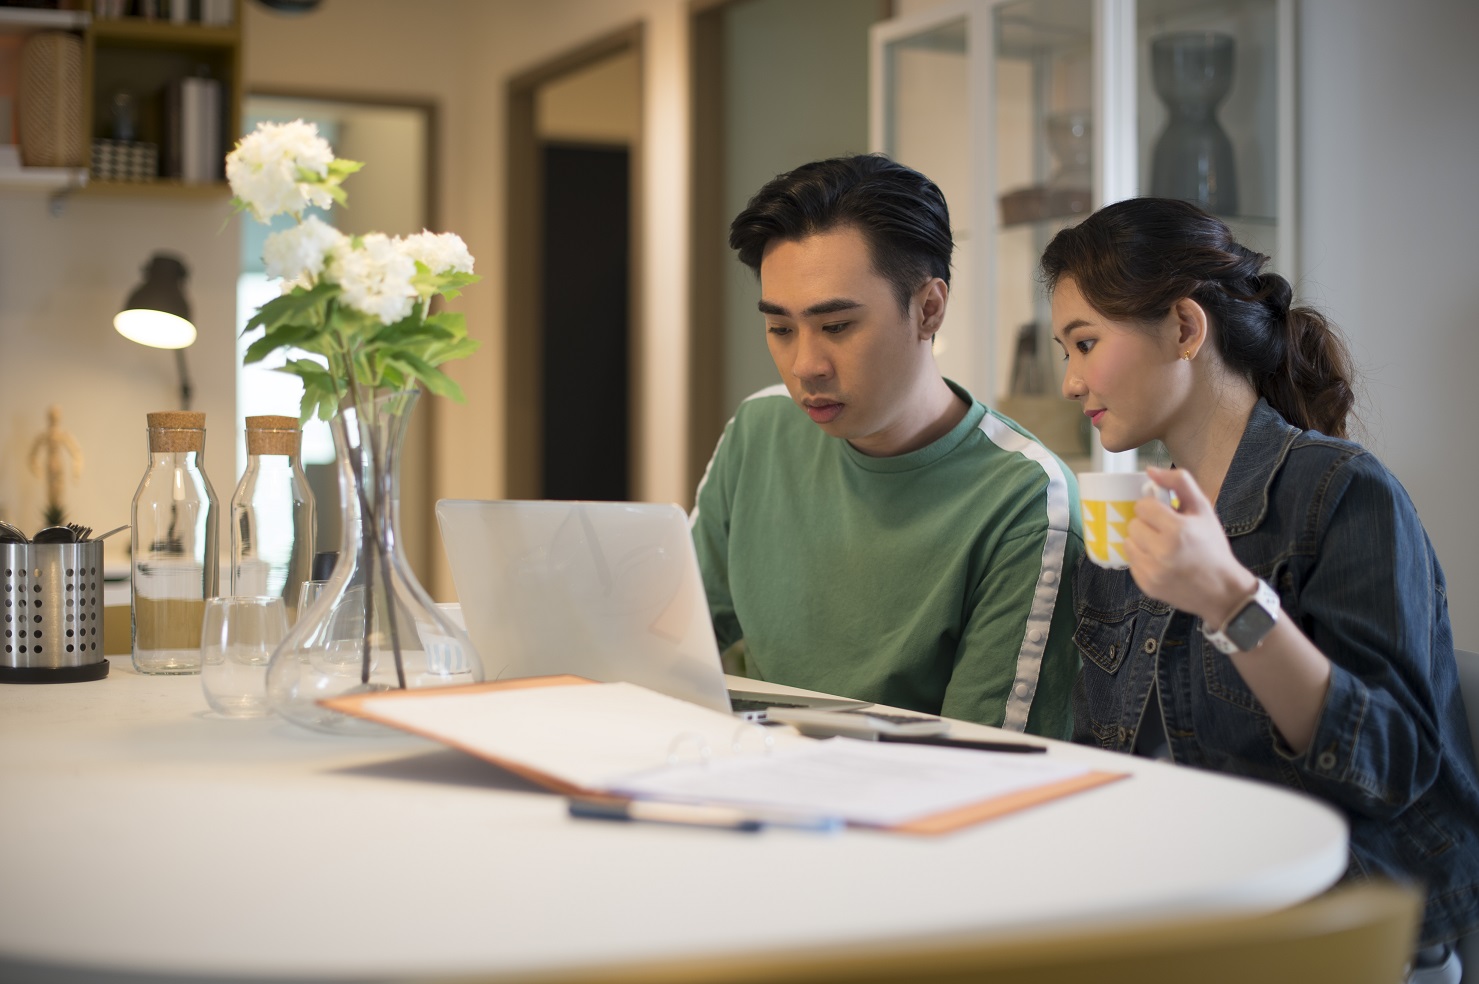 Young couple sitting at the desk planning their home purchase, with their laptop and writing materials